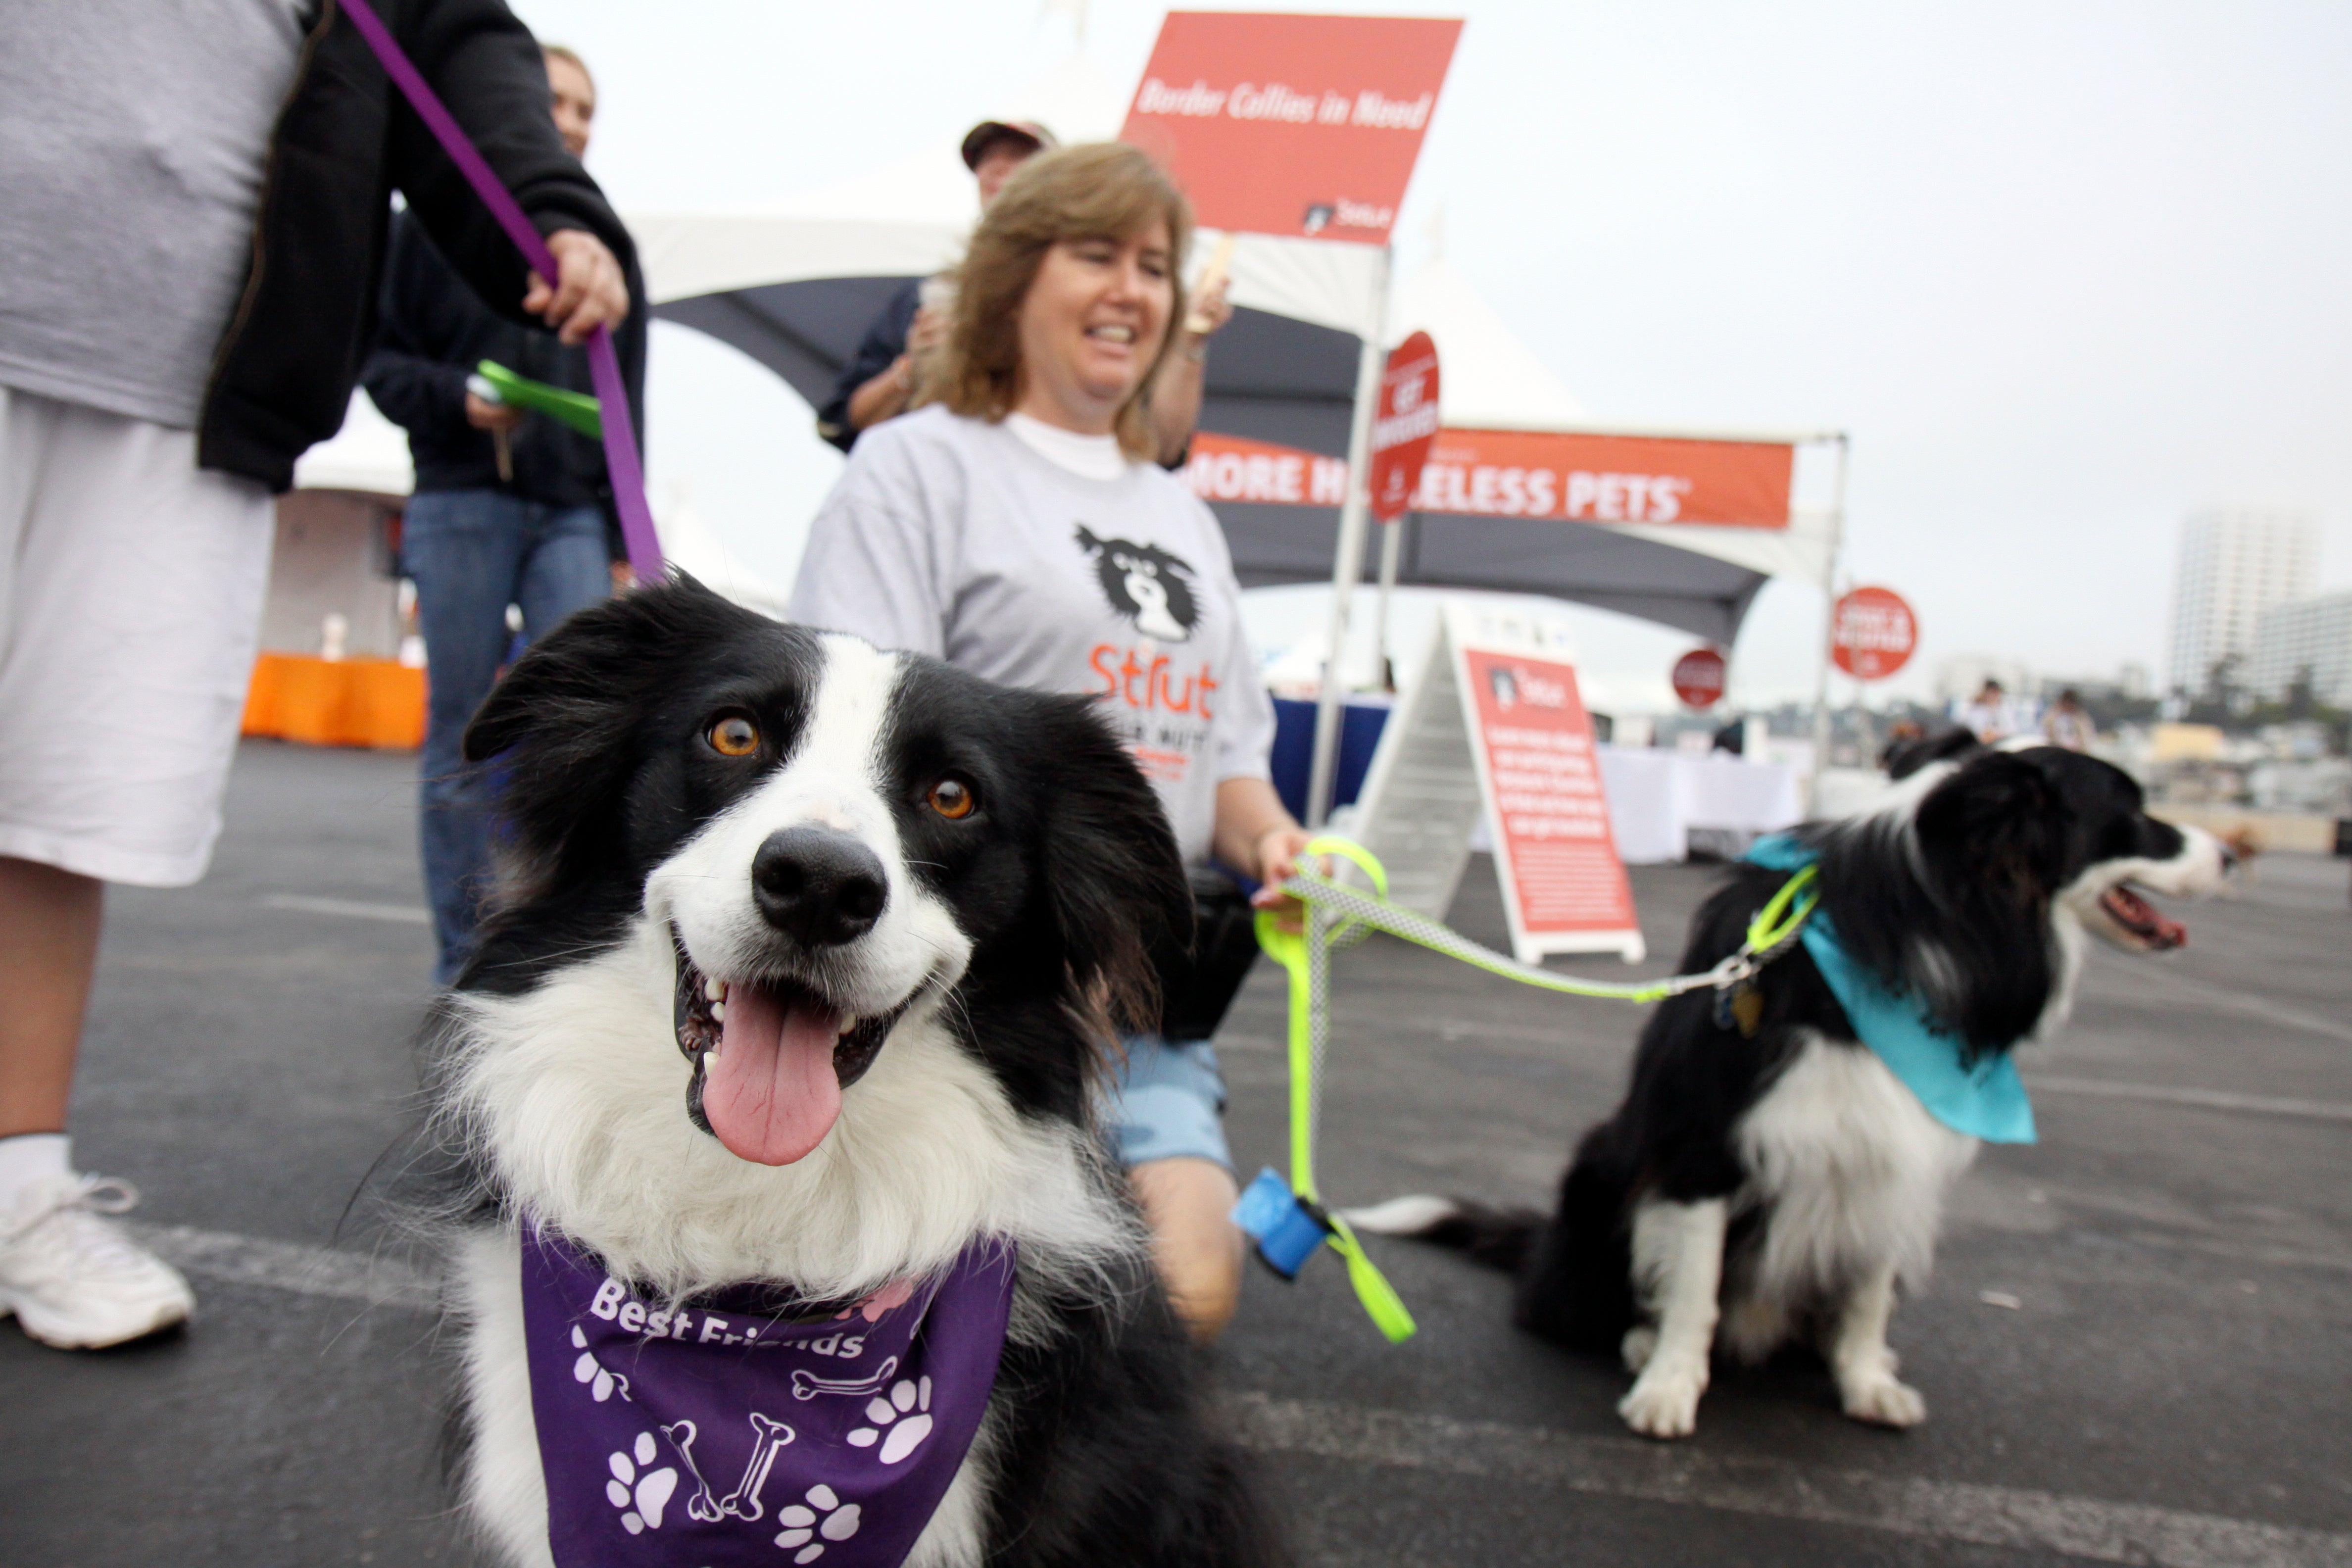 During the 2010 Strut Your Mutt in Los Angeles, people and their pooches gathered to save lives and raised over $134,000 for homeless pets in Los Angeles and across the country.